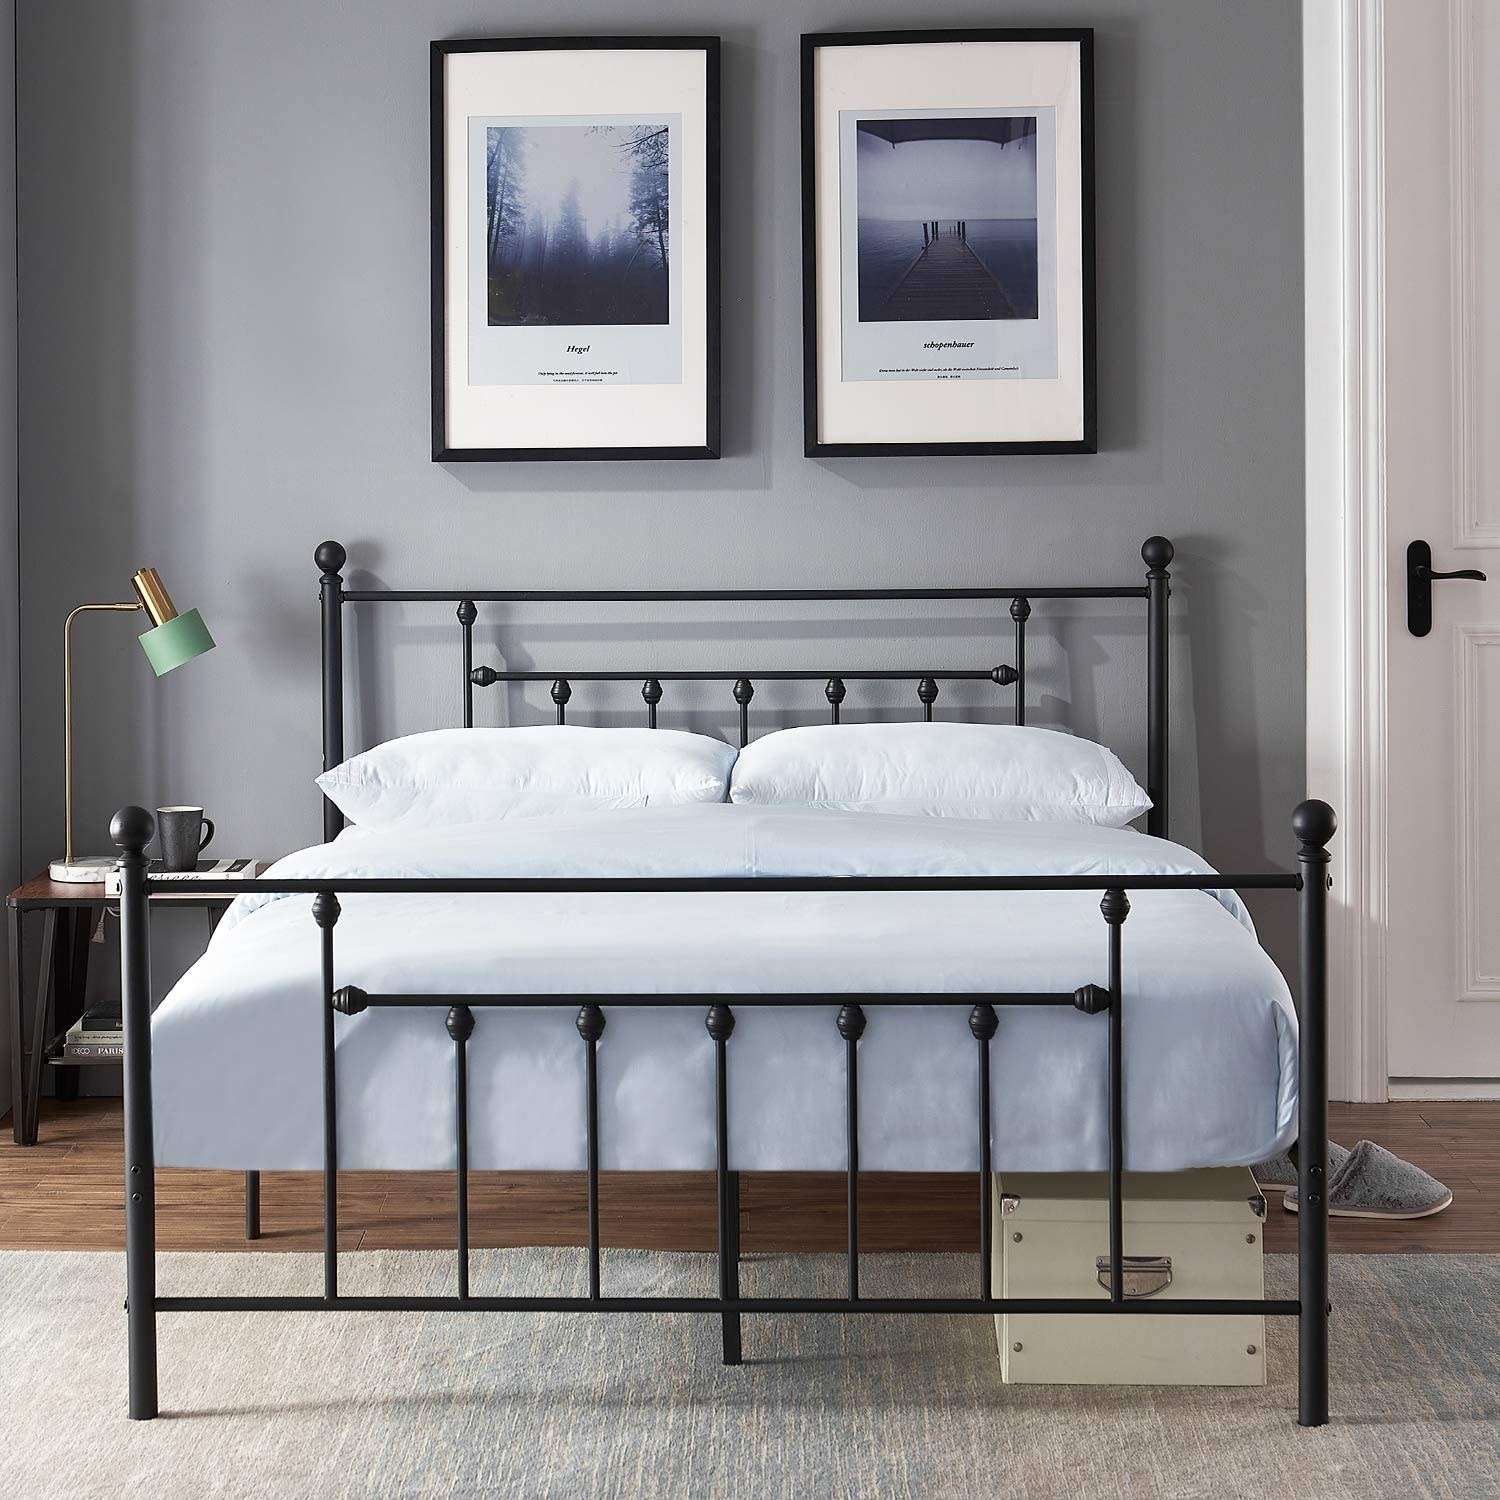 27 Bed Frames That Only Look, Queen Bed Frame With Storage Under 30000